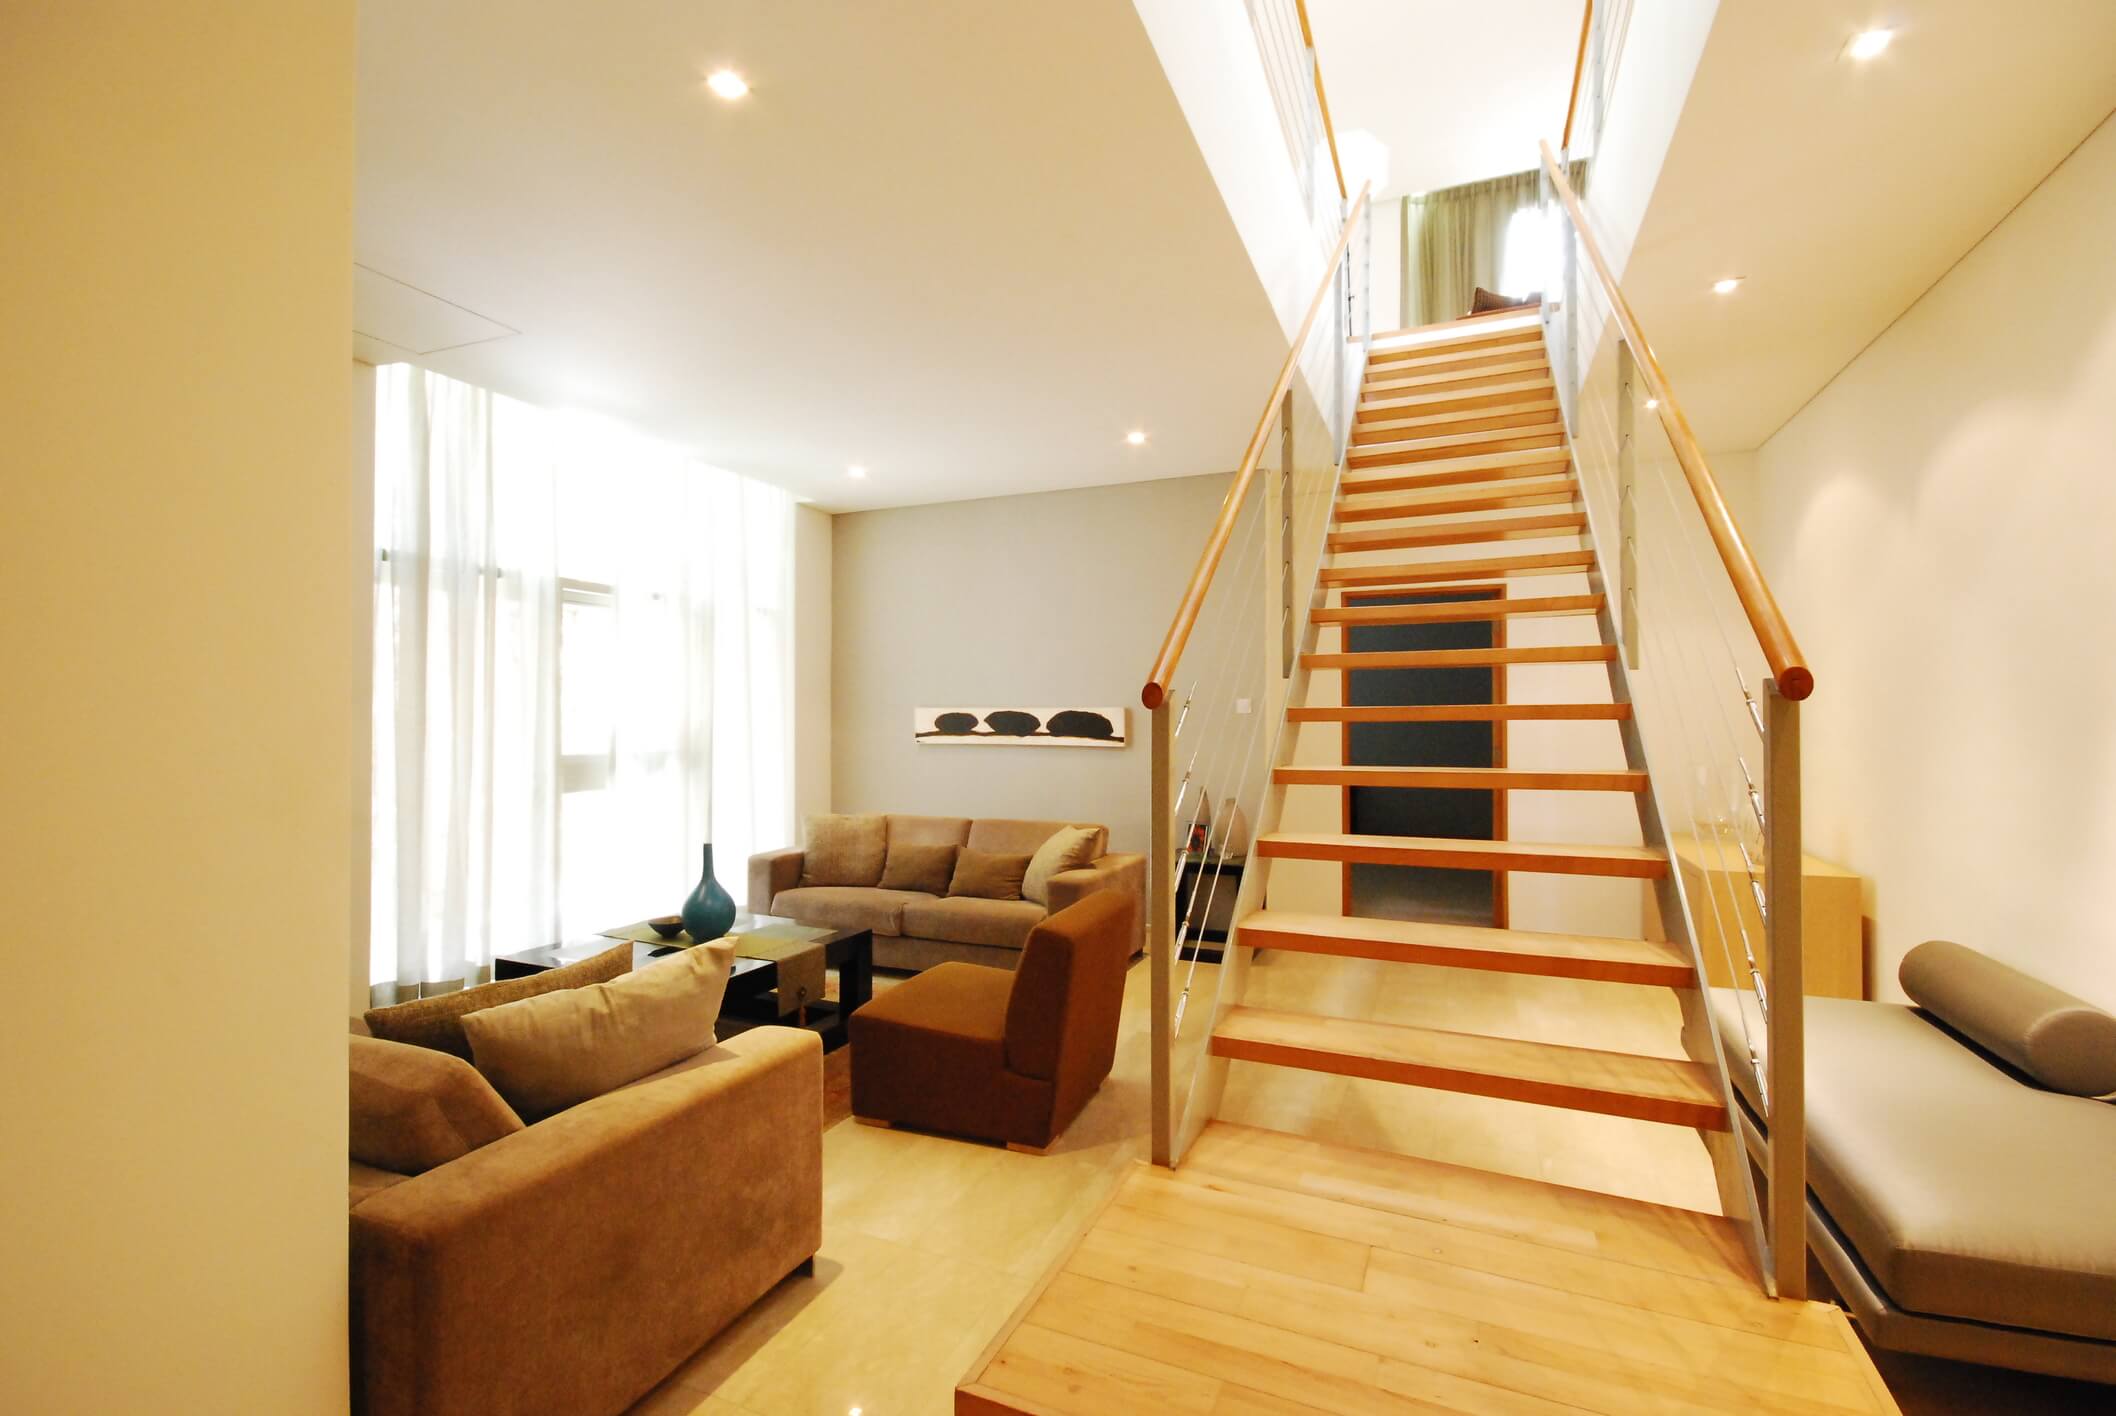 Modern living room basement conversion, with staircase leading upstairs